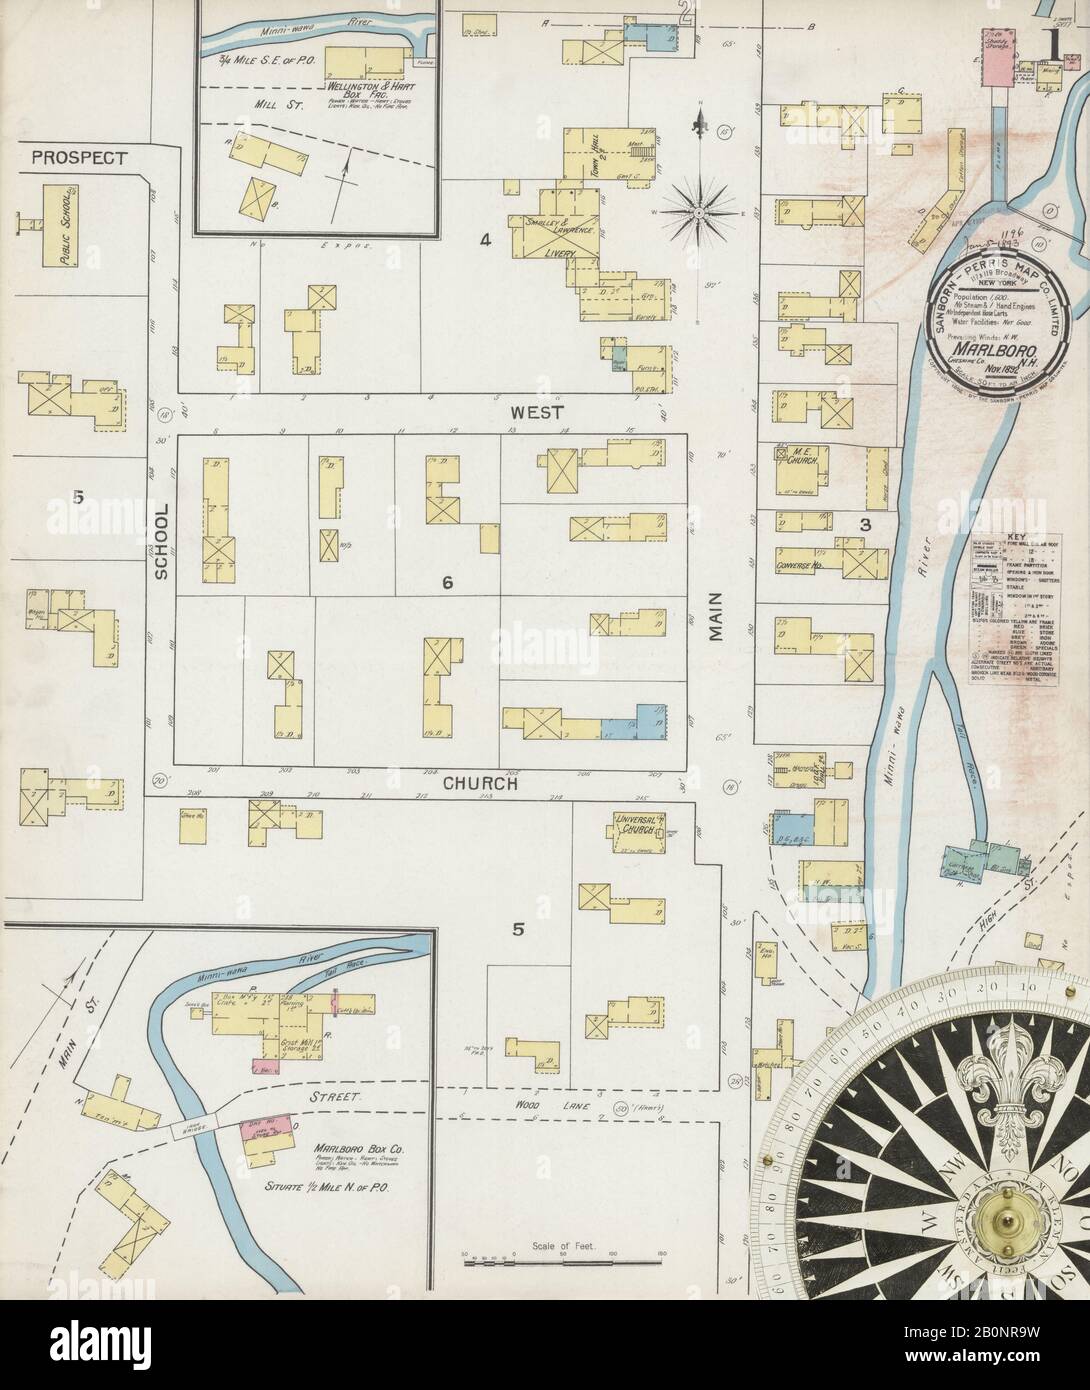 Image 1 of Sanborn Fire Insurance Map from Marlborough, Cheshire County, New Hampshire. Nov 1892. 2 Sheet(s). Includes Titled Marlboro, America, street map with a Nineteenth Century compass Stock Photo